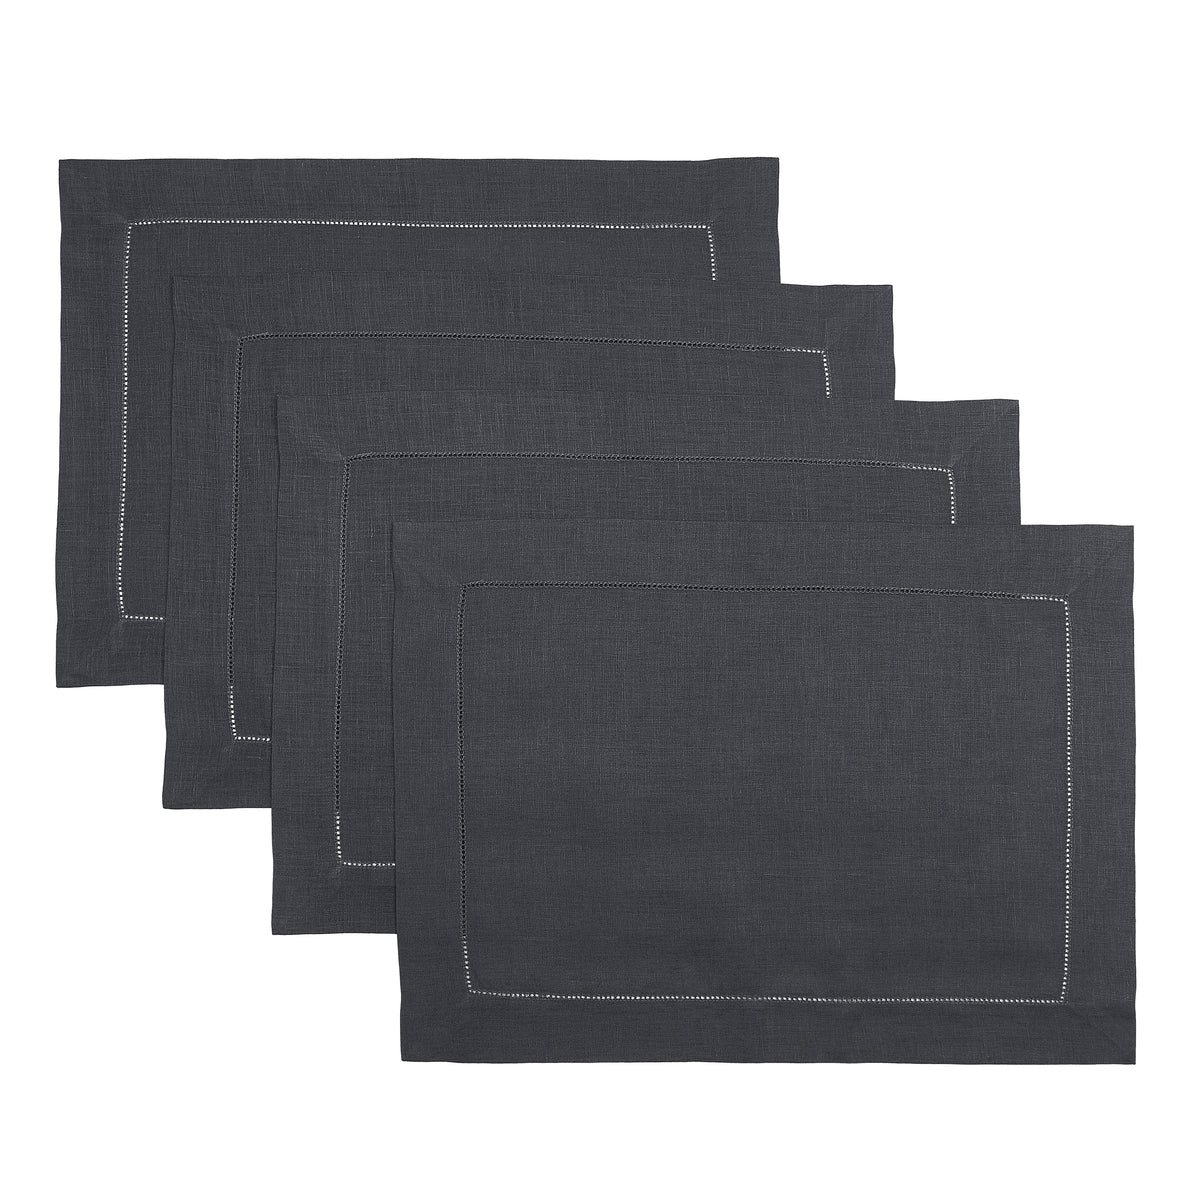 Charcoal Grey Linen Placemats 14 x 19 Inch Set of 4 - Hemstitch